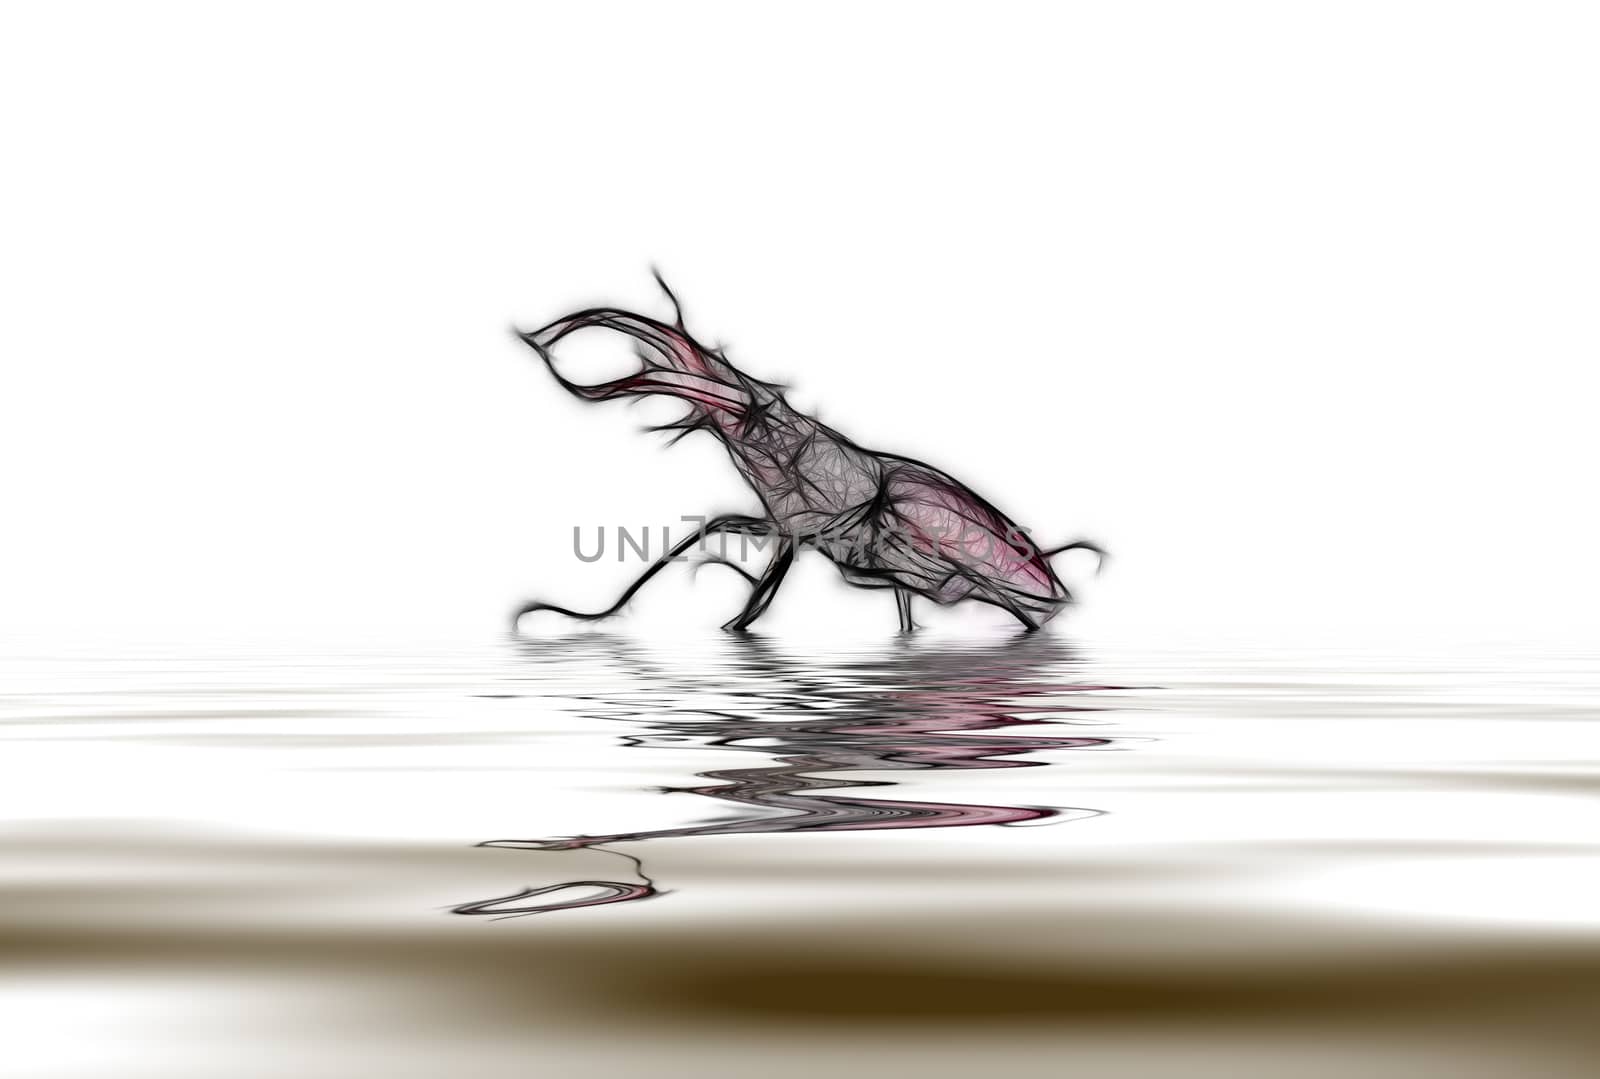 Abstraction as a rhinoceros beetle in defensive stance with reflection in water